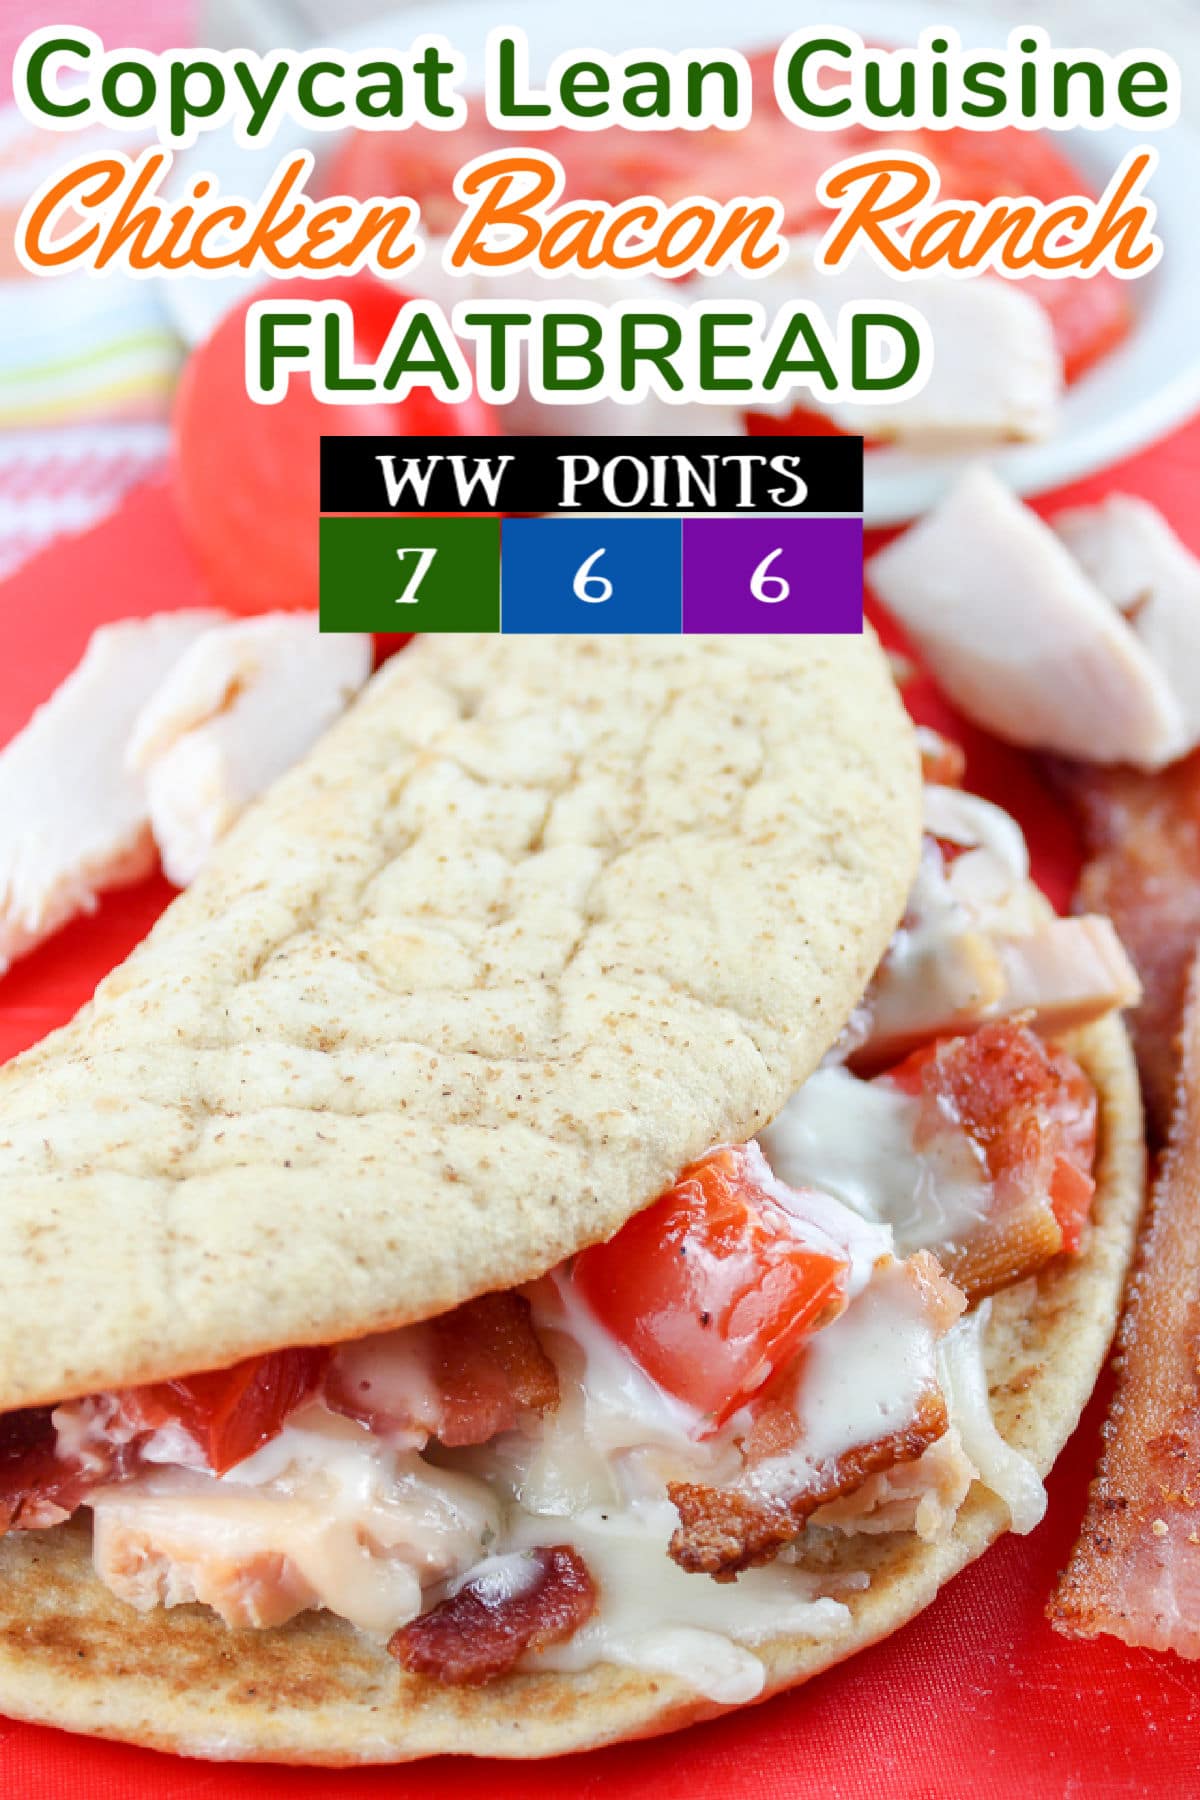 This copycat version Lean Cuisine's Chicken Ranch Club Flatbread Melt tastes better and has less Weight Watchers points than the original - so it's an all-around healthy eating victory!! I love how soft flatbread is! Plus the tomato and ranch make this super juicy!  via @foodhussy